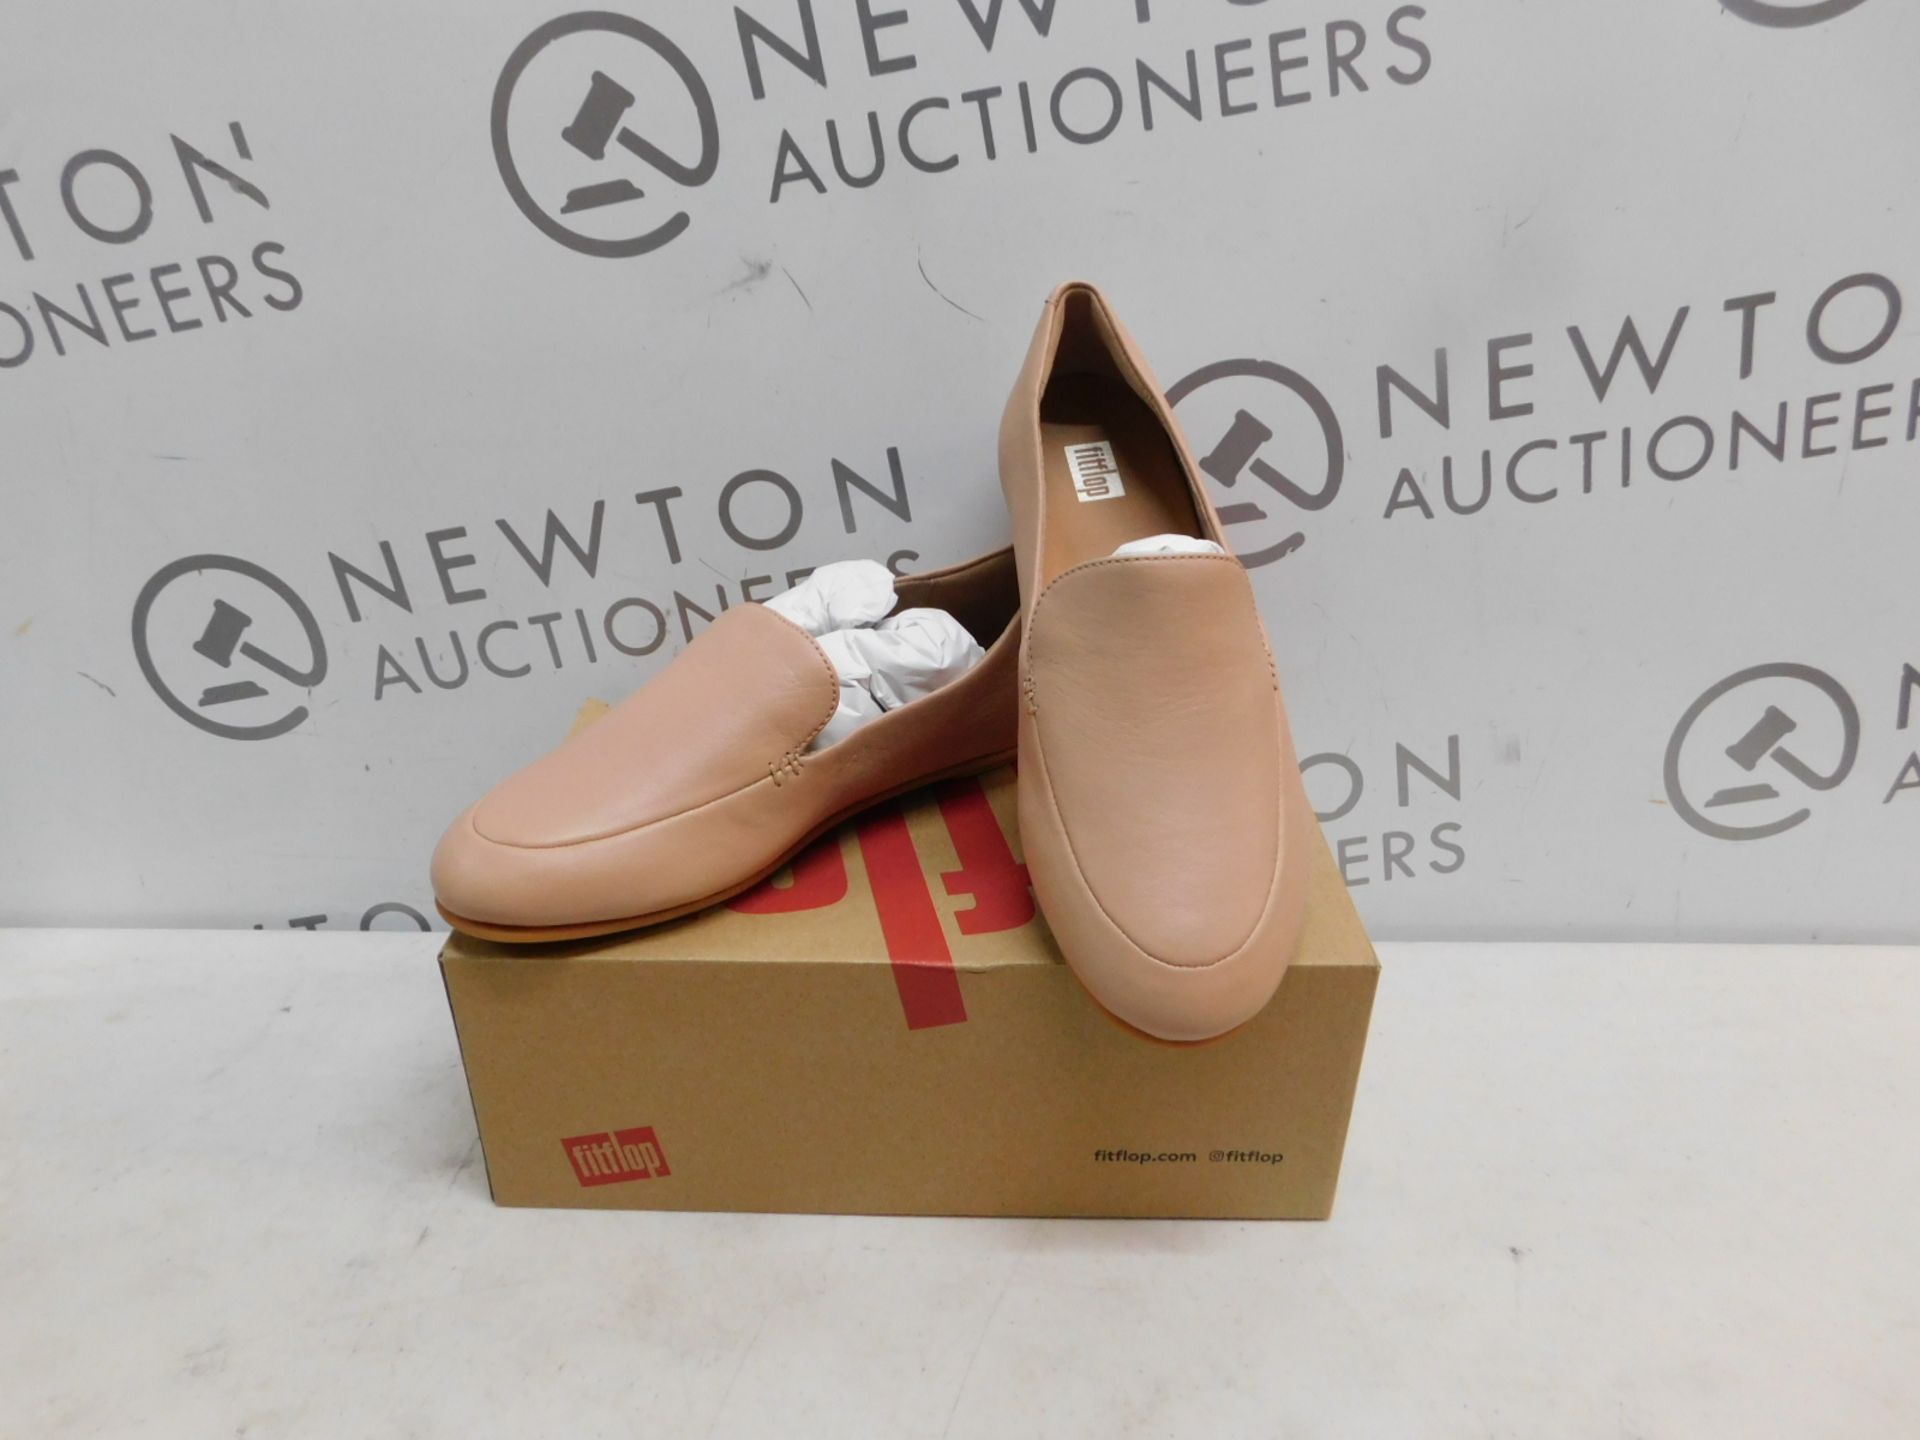 1 BRAND NEW BOXED PAIR OF LADIES FITFLOP LEATHER LENA LOAFERS UK SIZE 3 RRP Â£79